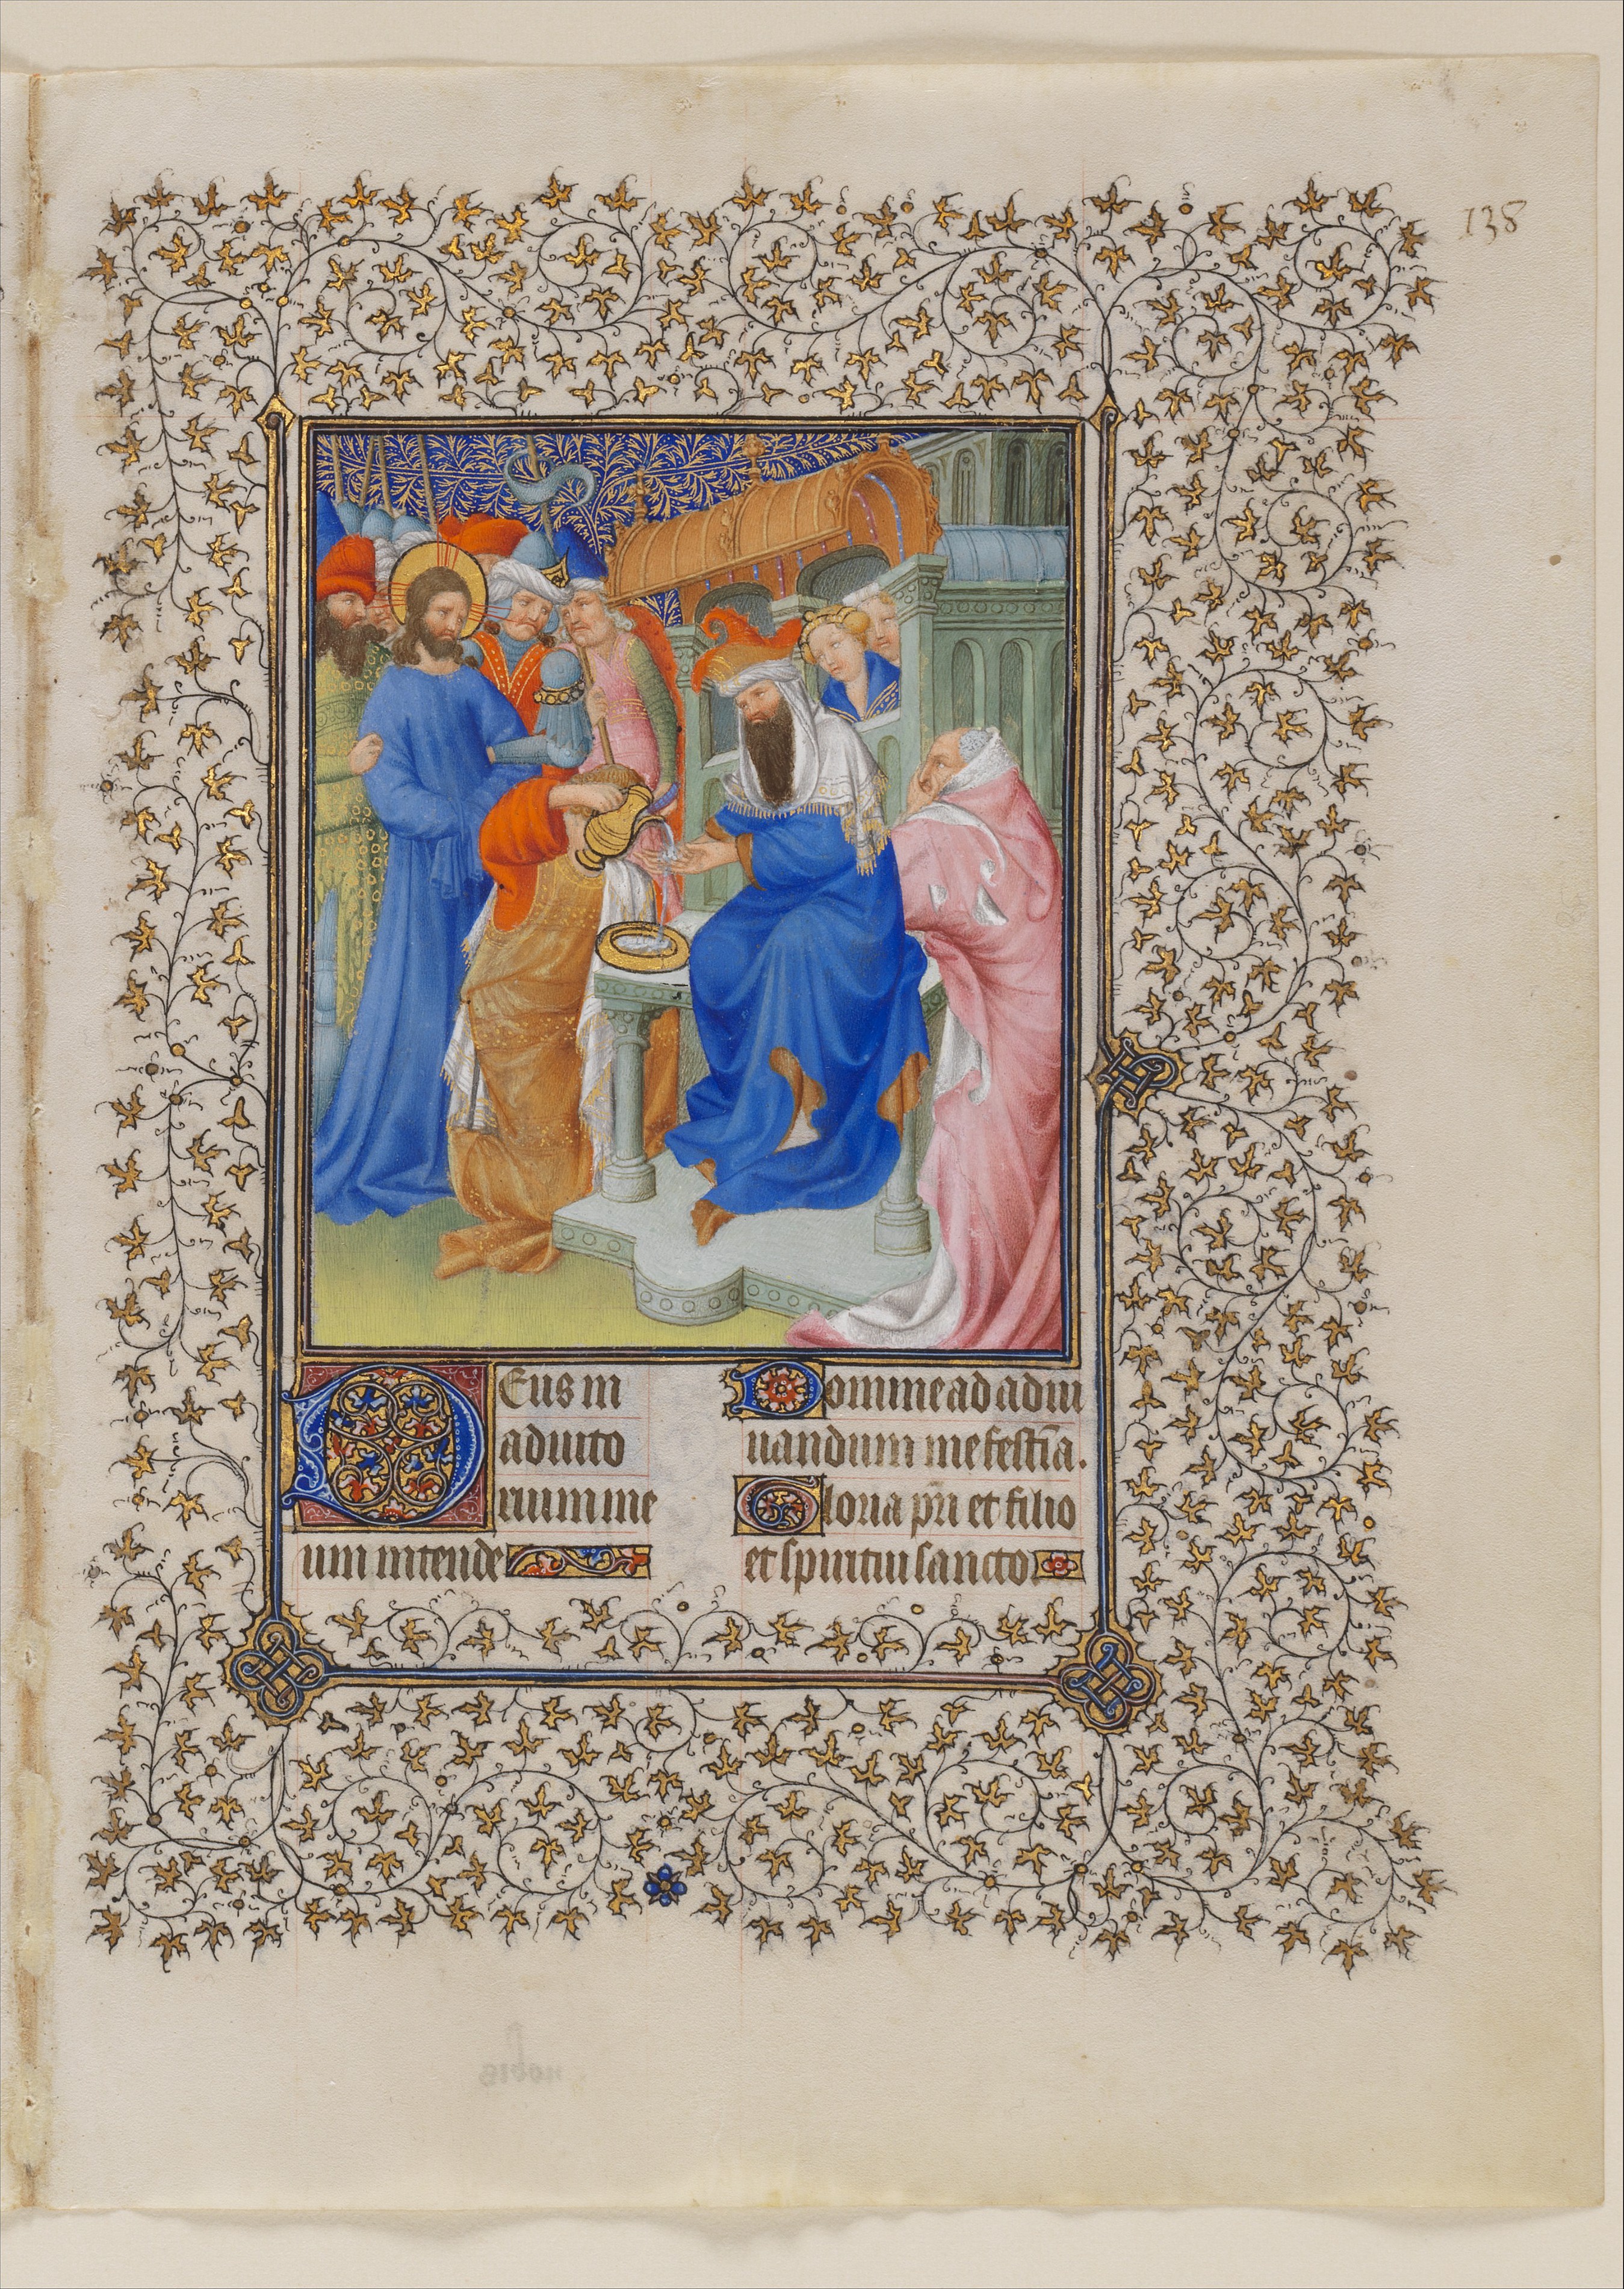 The Limbourg Brothers | The Belles Heures of Jean de France, duc ...